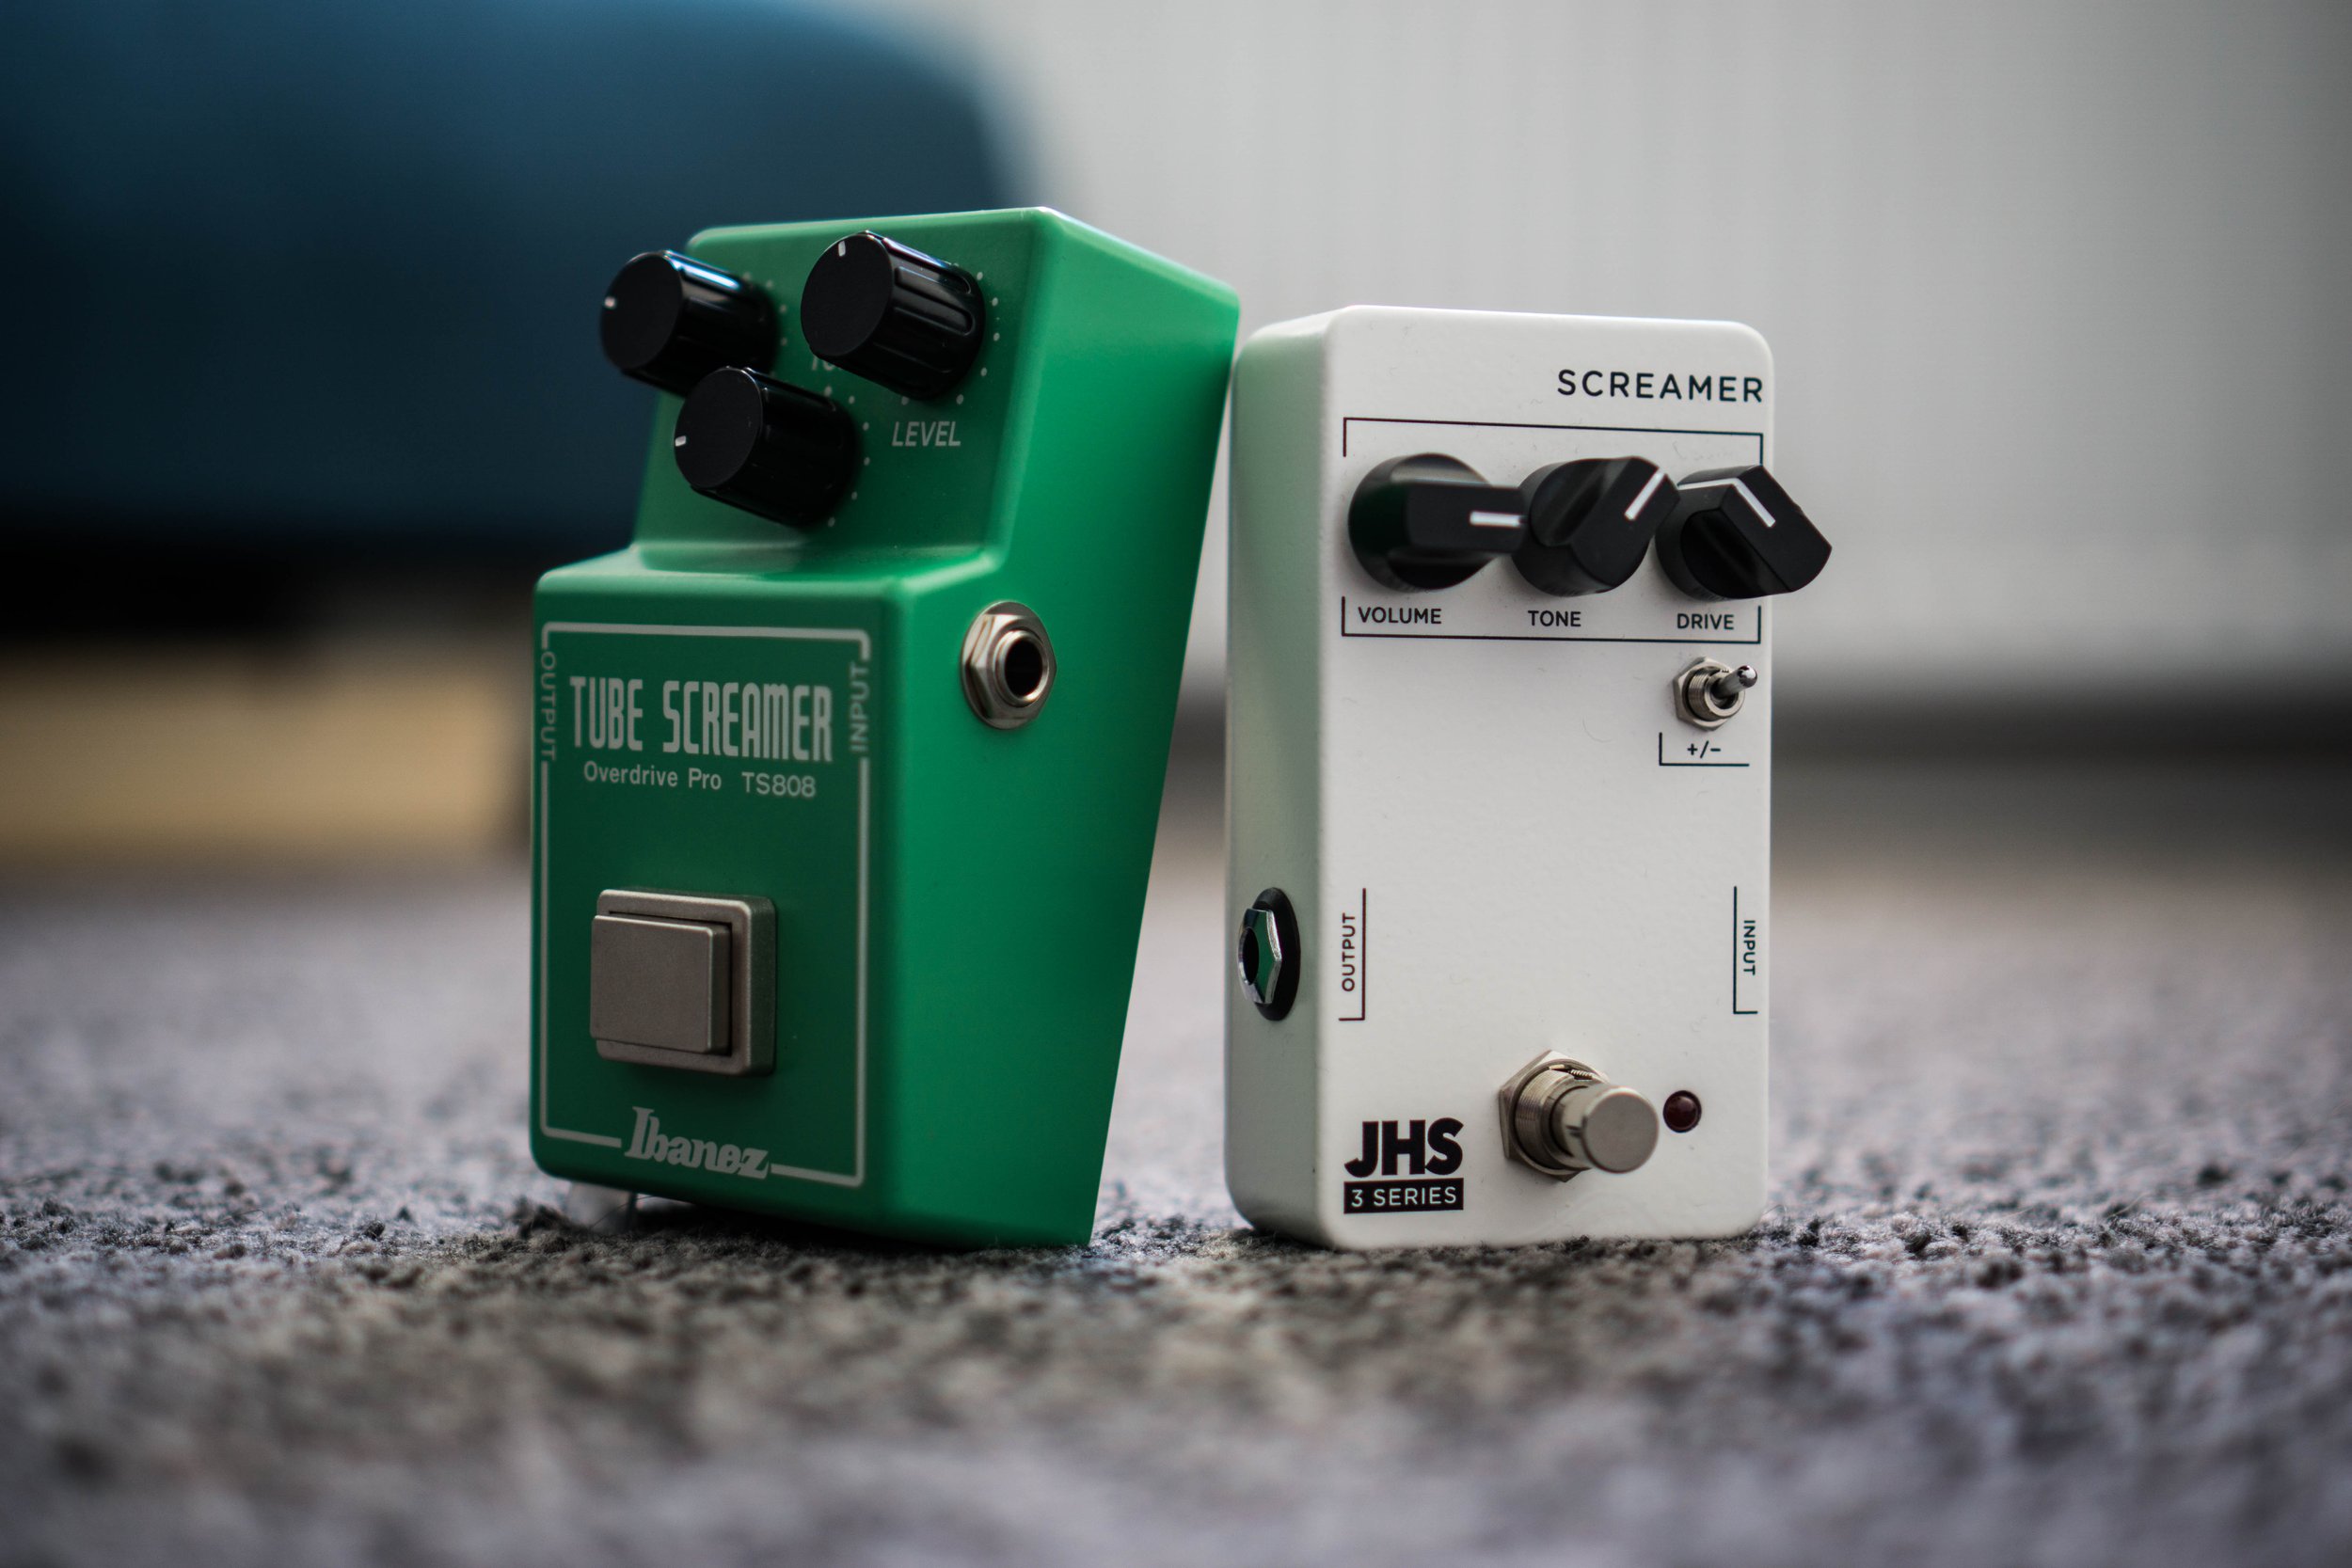 JHS 3 Series Screamer Review — The Gear Check